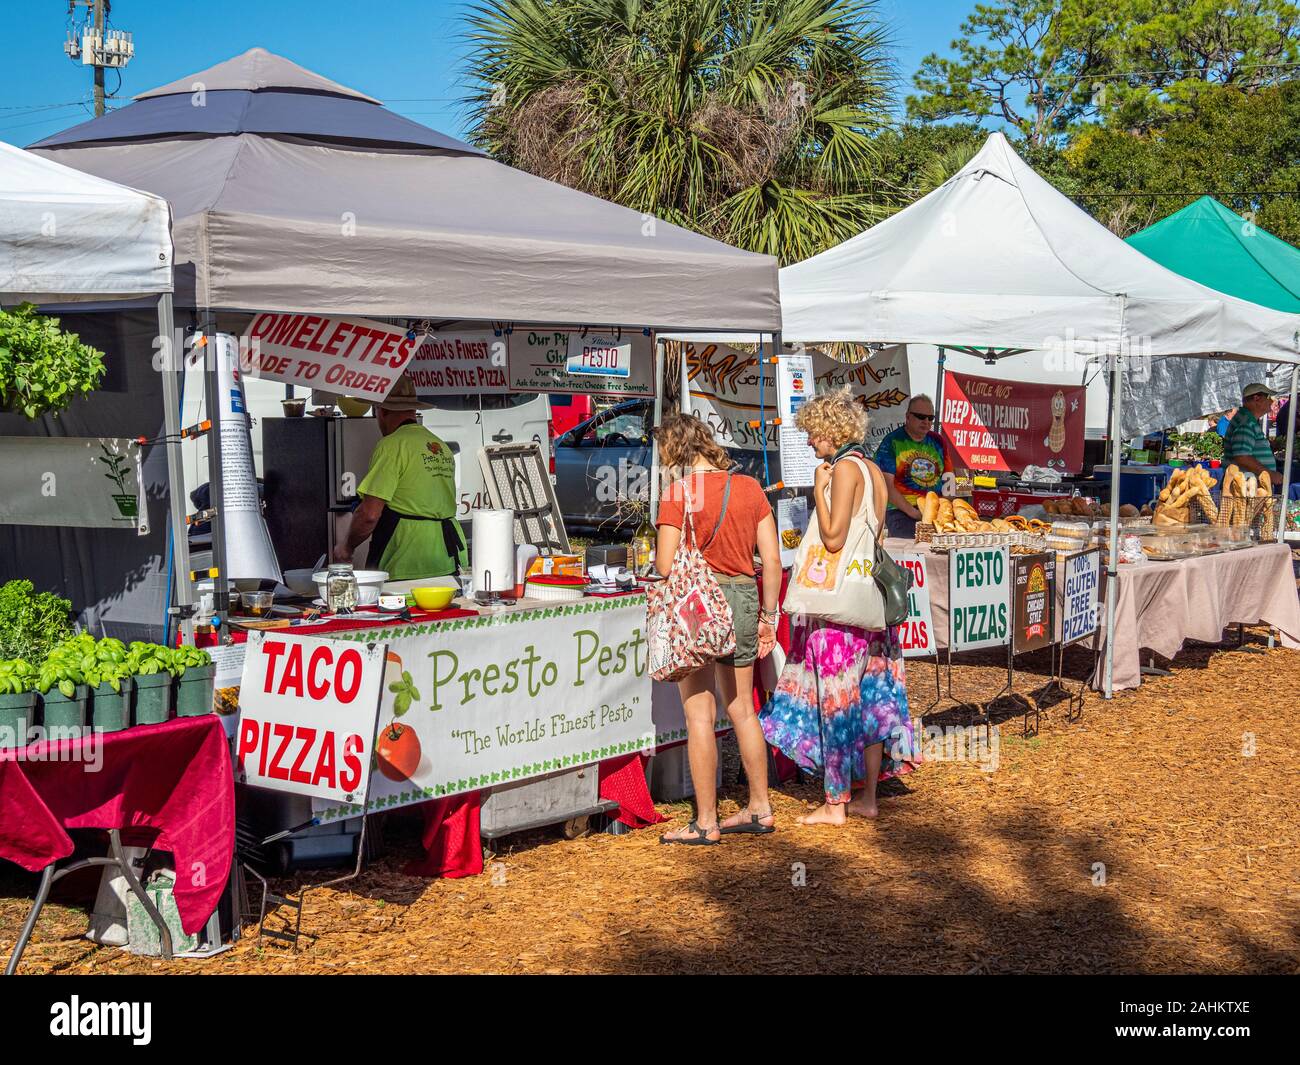 The Englewood Farmers Market an open air market in Englewood Florida Stock Photo